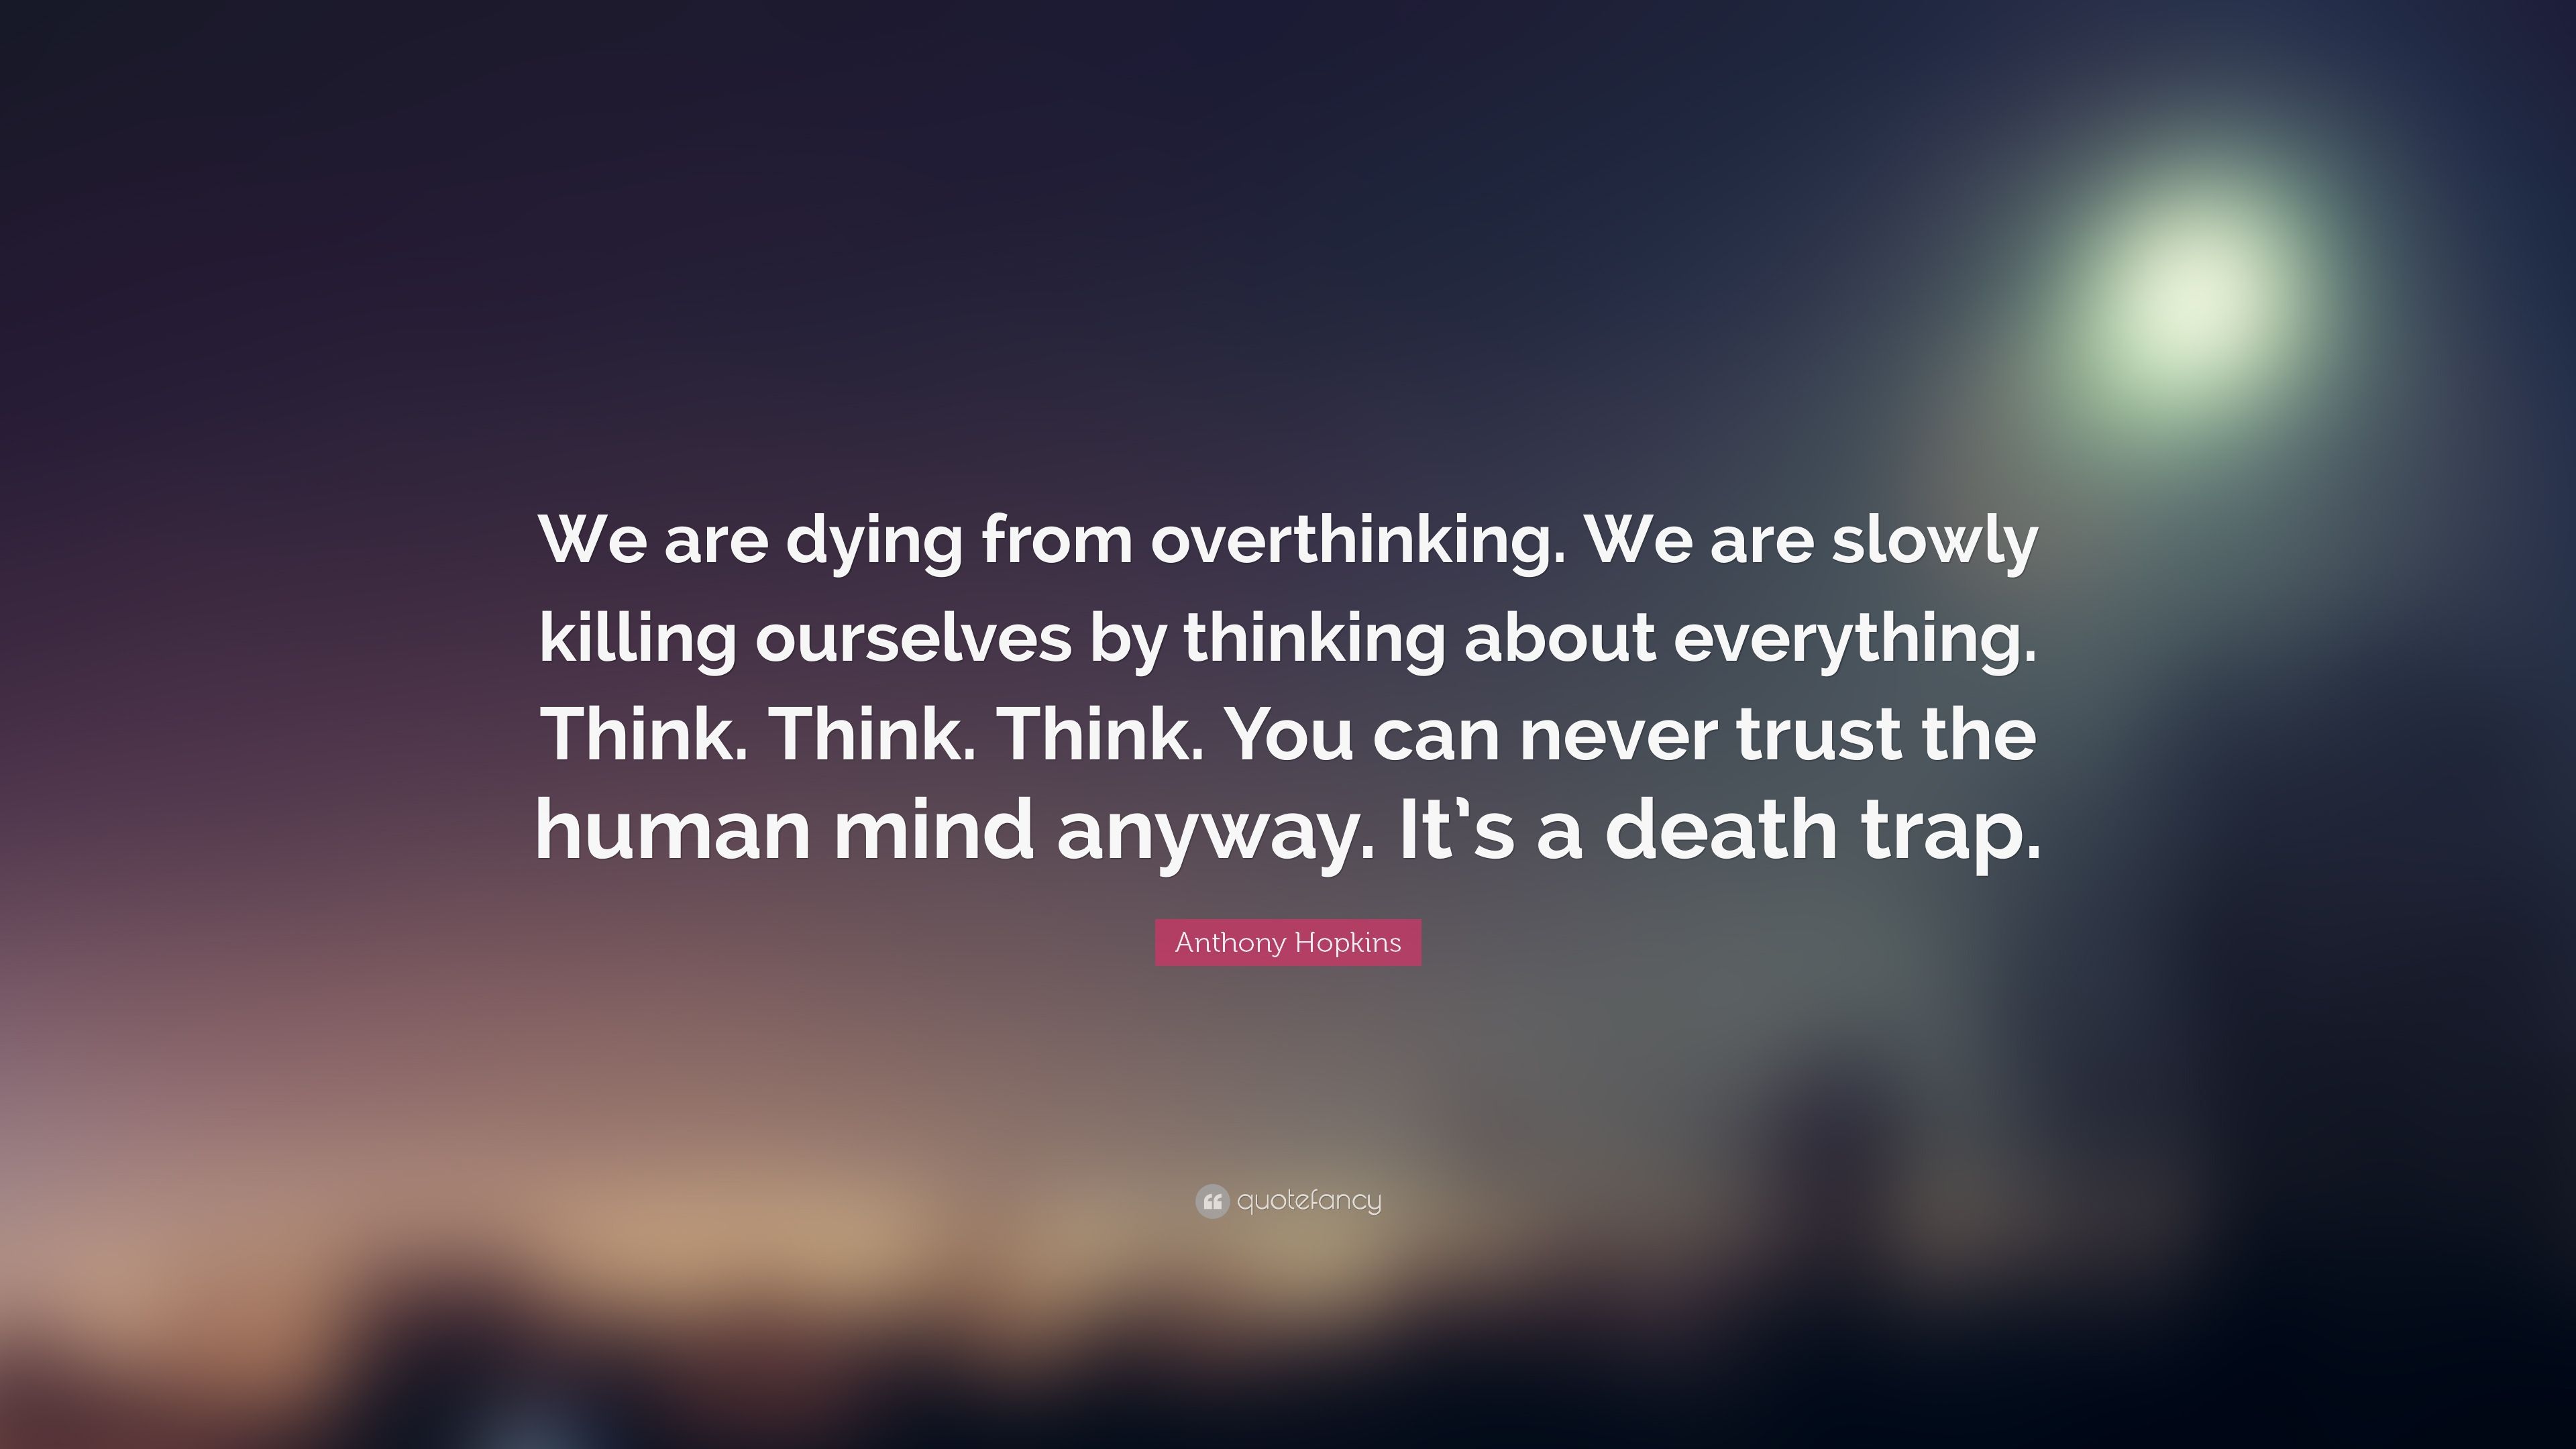 Anthony Hopkins Quote: “We are dying from overthinking. We are slowly killing ourselves by thinking about everything. Think. Think. Think. You c.” (24 wallpaper)